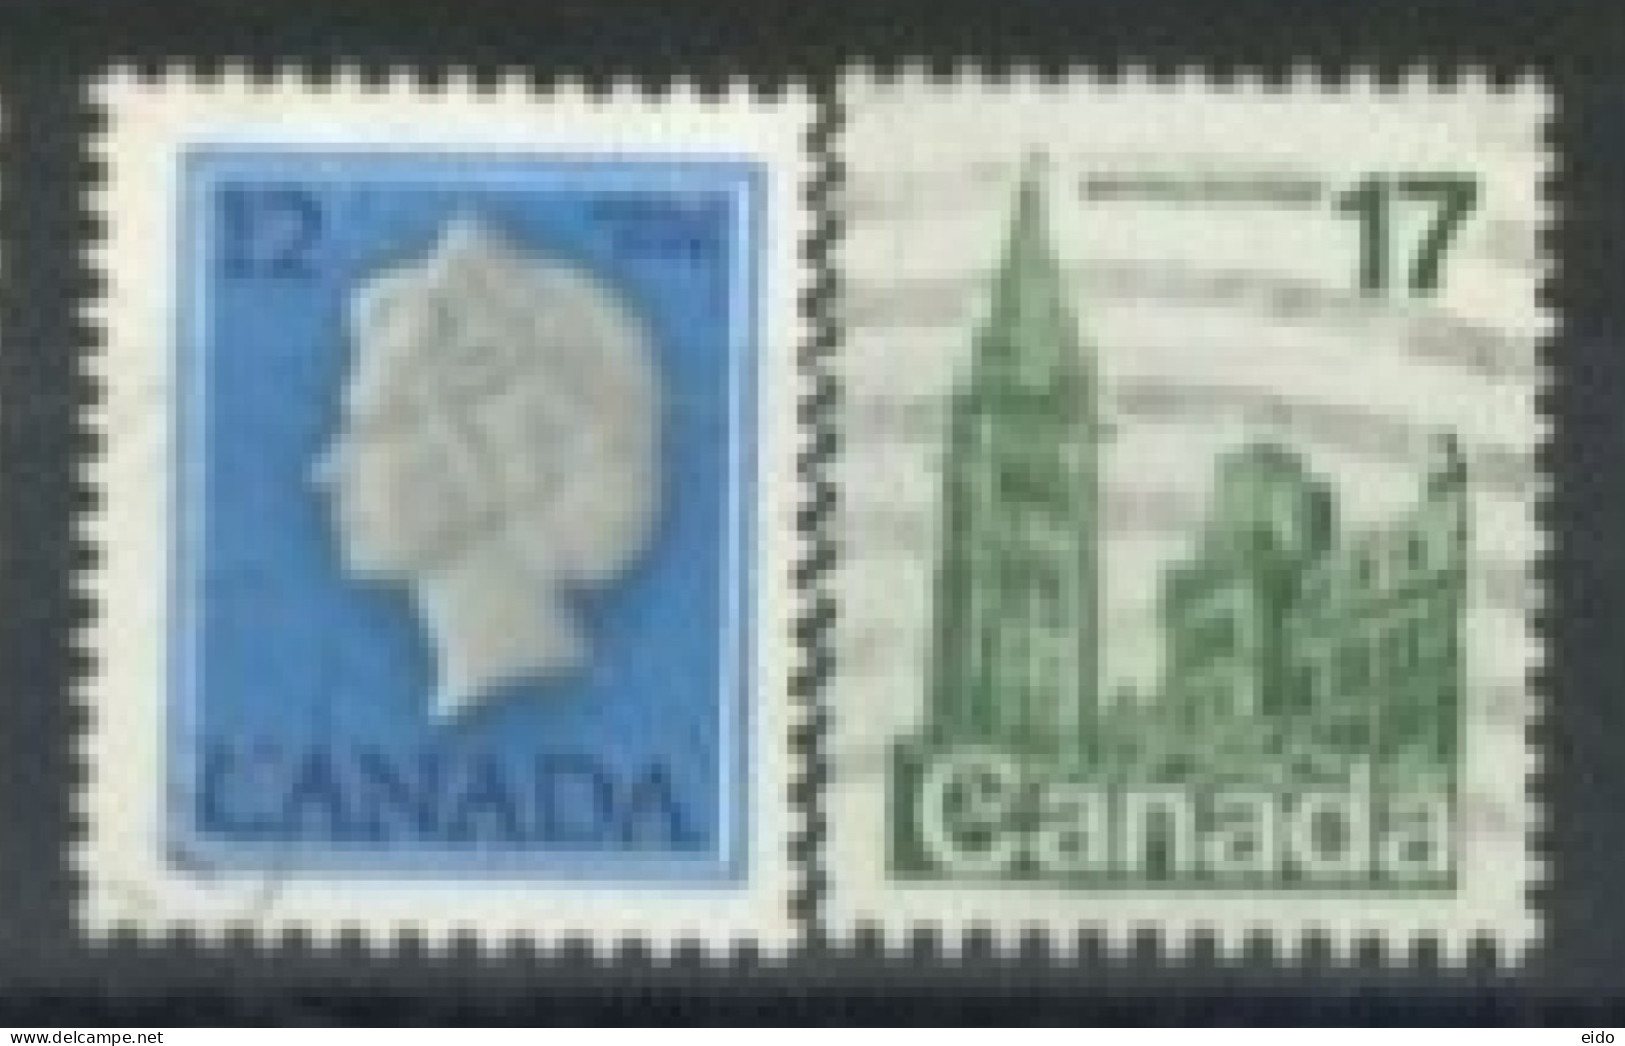 CANADA - 1977, QUEEN ELIZABETH II & HOUSE OF PARLIAMENT STAMPS SET OF 2, USED. - Usati